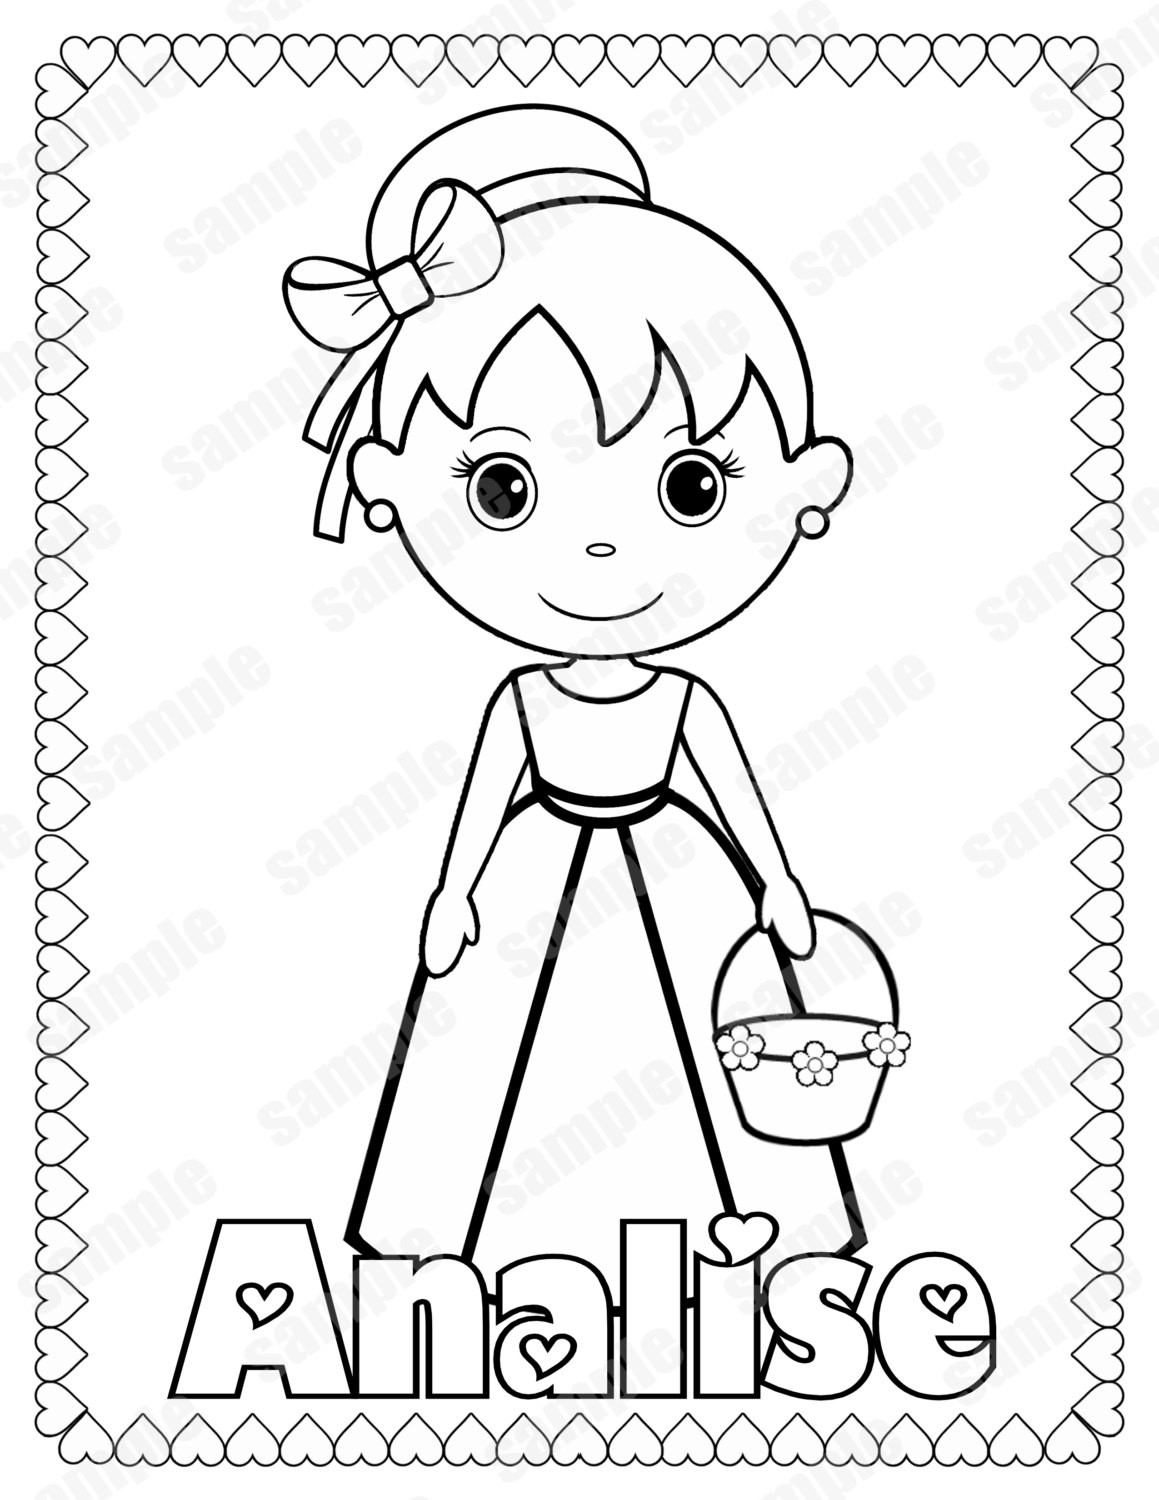 Personalized Flower Girl Coloring Book
 PRINTABLE Flower girl or Ring bearer Wedding Activity book